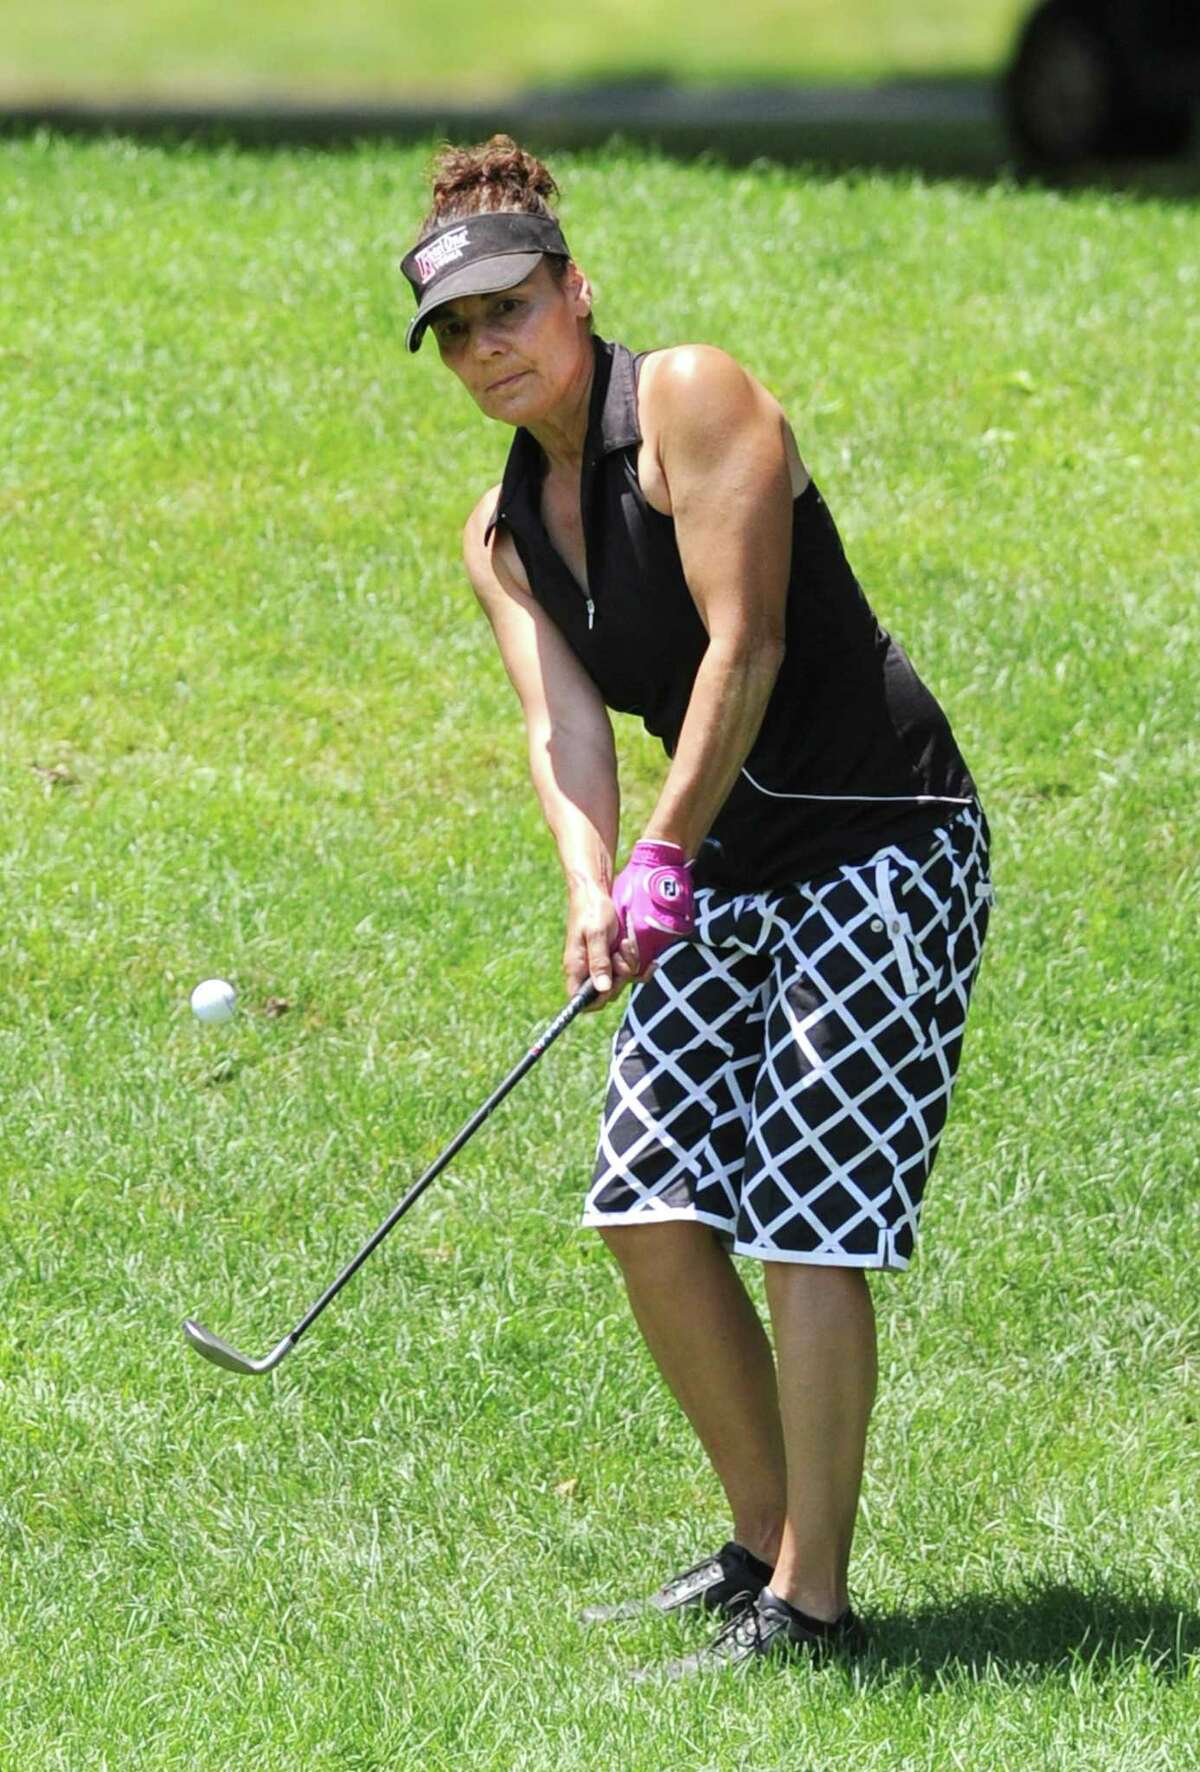 Carol Frattaroli hits a chip shot on day two of the 2017 Stamford Amateur Golf Championship at Sterling Farms Golf Course in Stamford, Conn. Sunday, June 25, 2017. Jason Jaworoski won the Mens Championship, Carol Frattaroli won the Womens Championship, and Rob Tyska won the Mens Senior Championship.